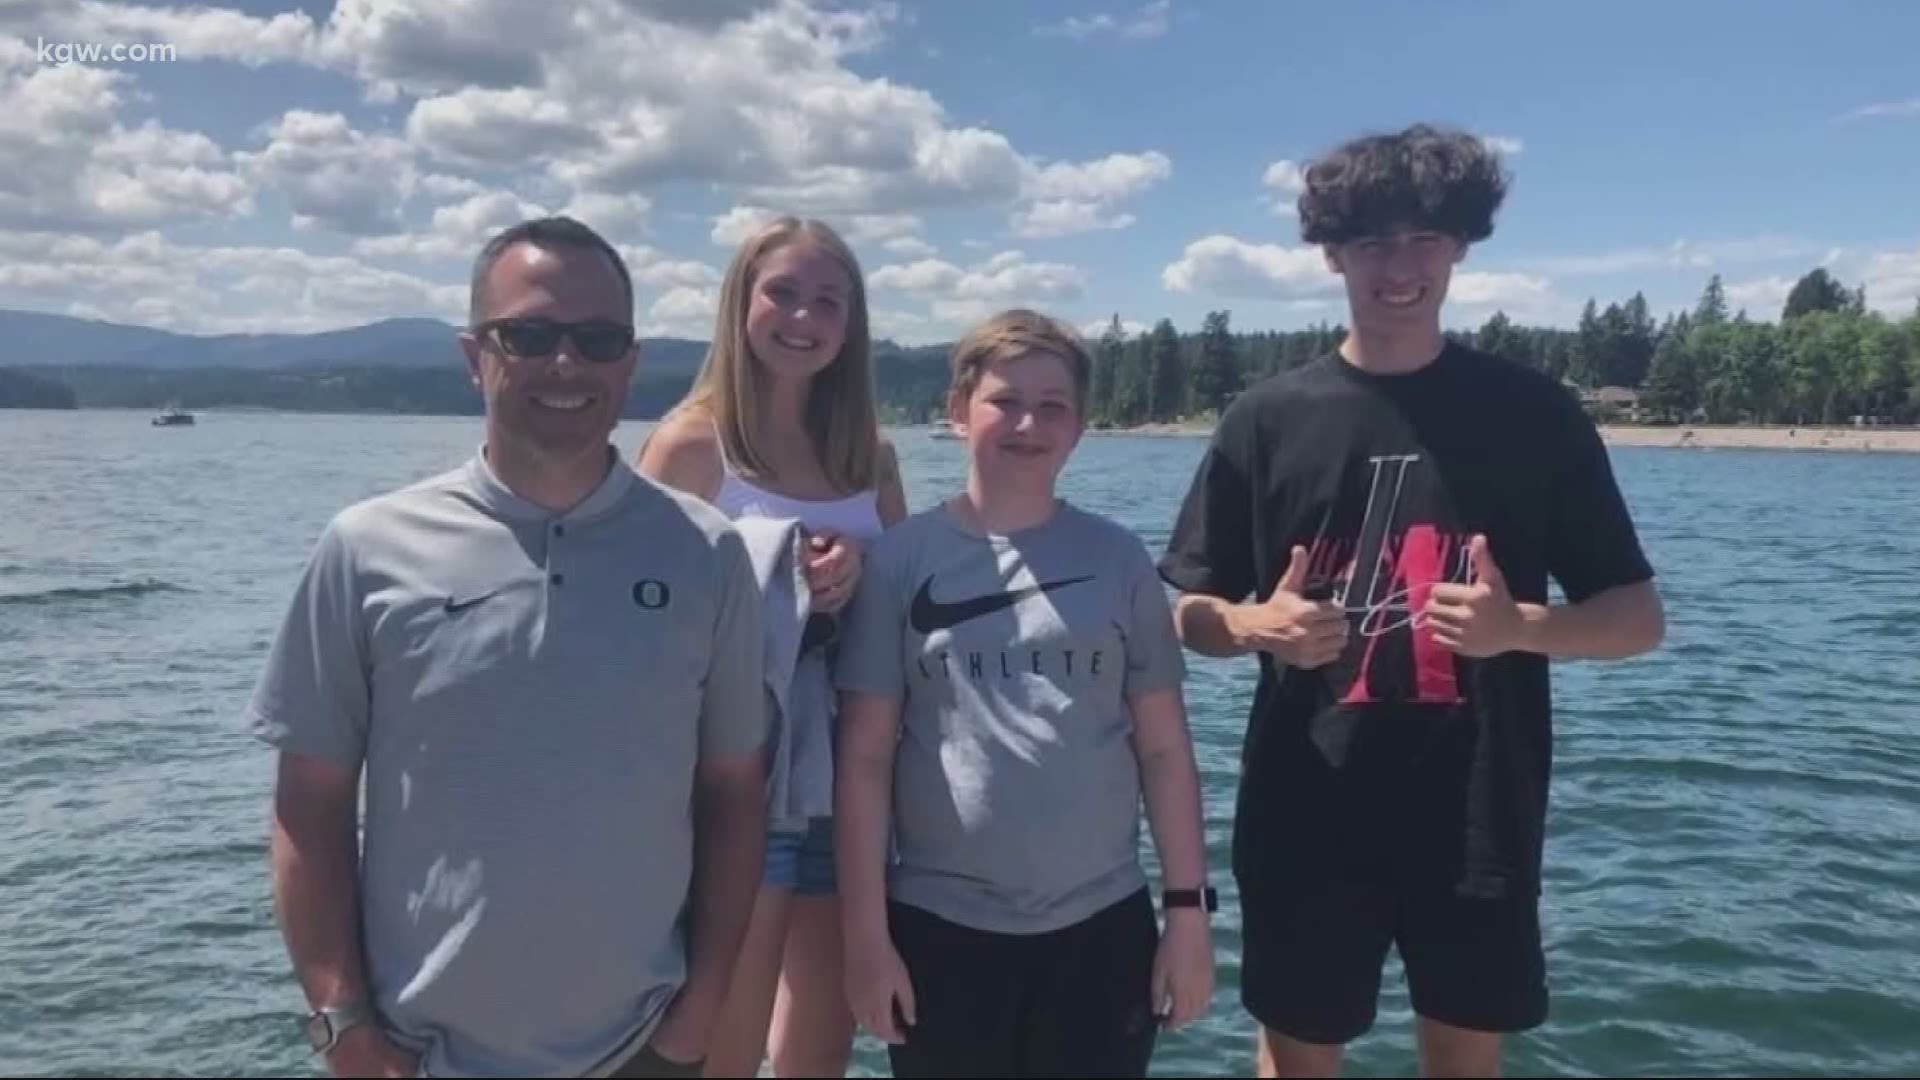 A tremendous husband, father and friend. That's how people are remembering Sean Fredrickson of Lake Oswego, one of the victims of a fatal plane crash over Lake Coeur